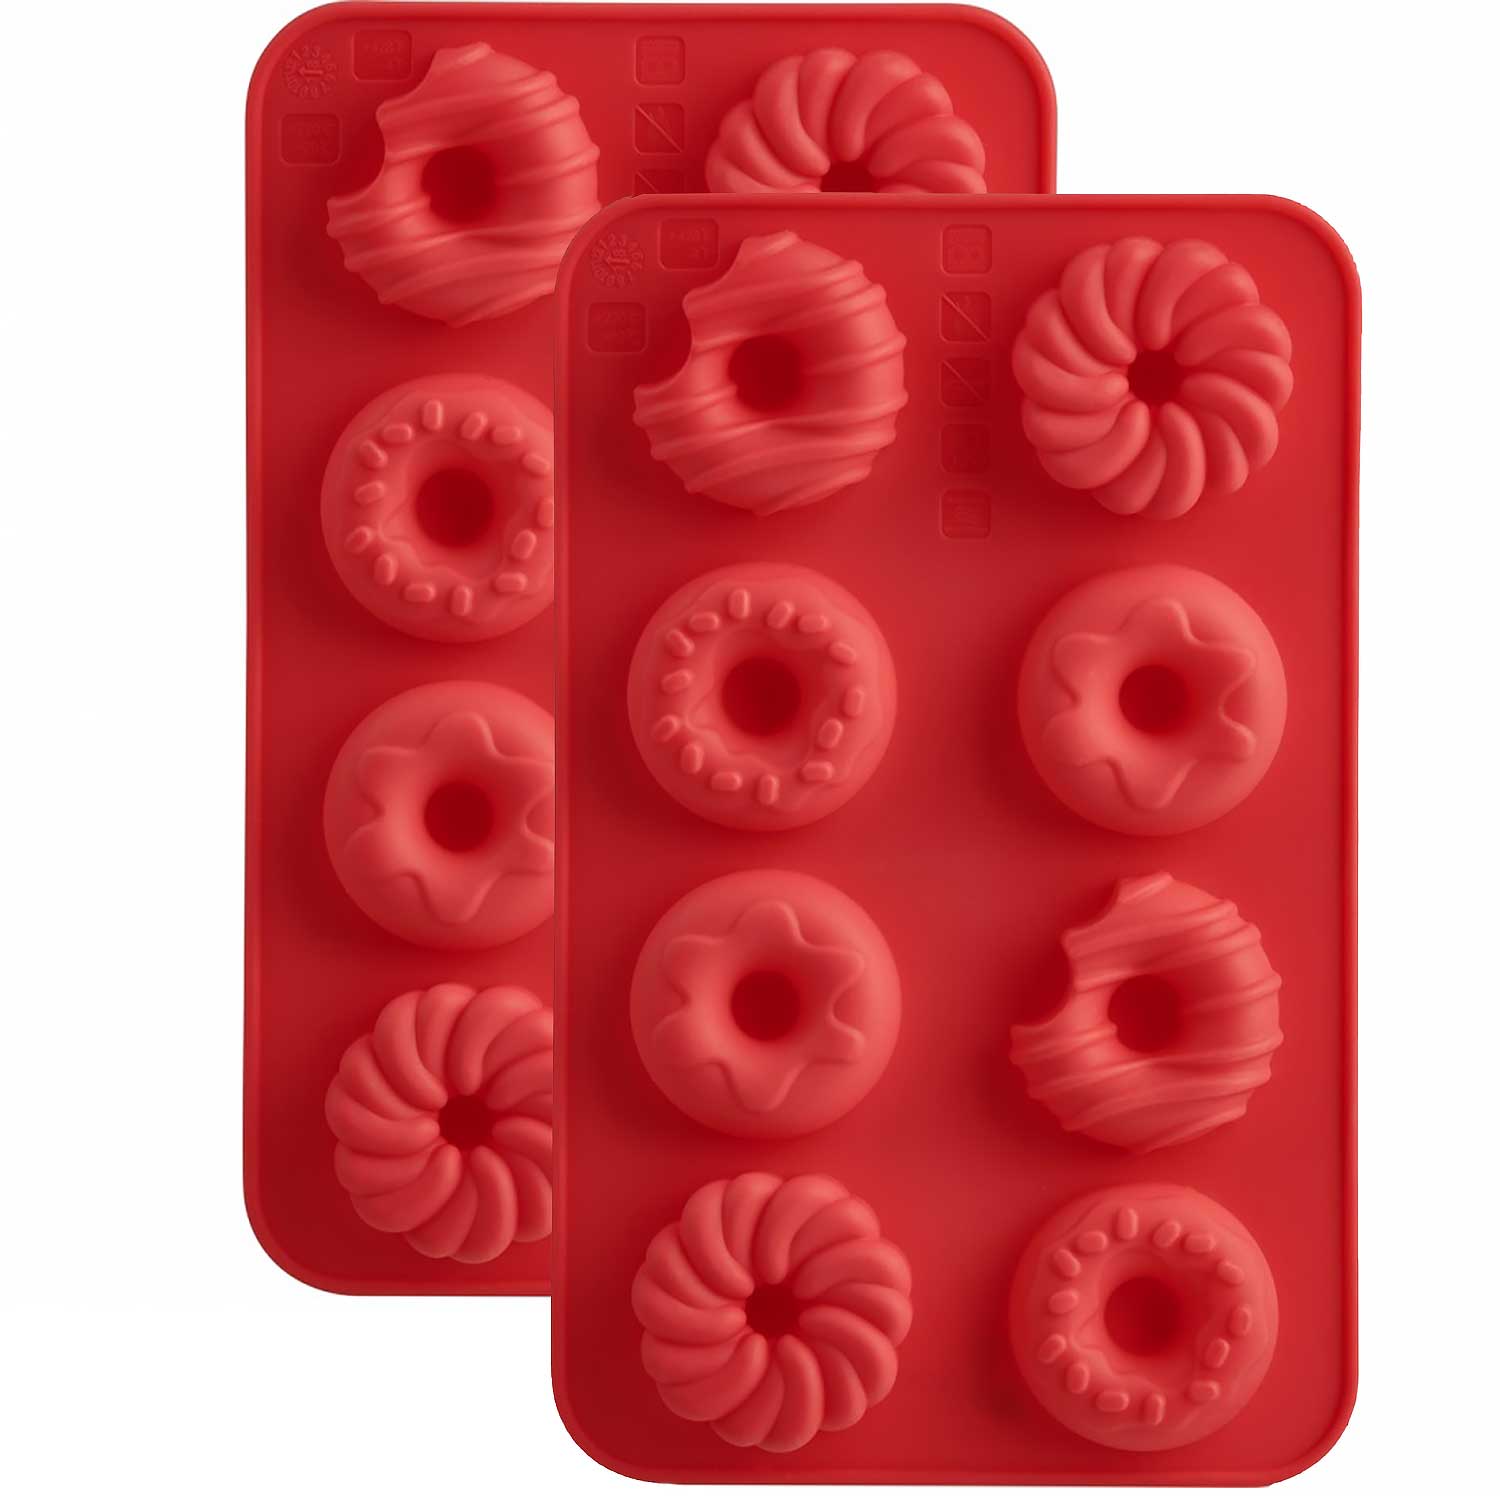 Silicone-Made Wholesale Chocolate Chip Molds Silicone for Baking 